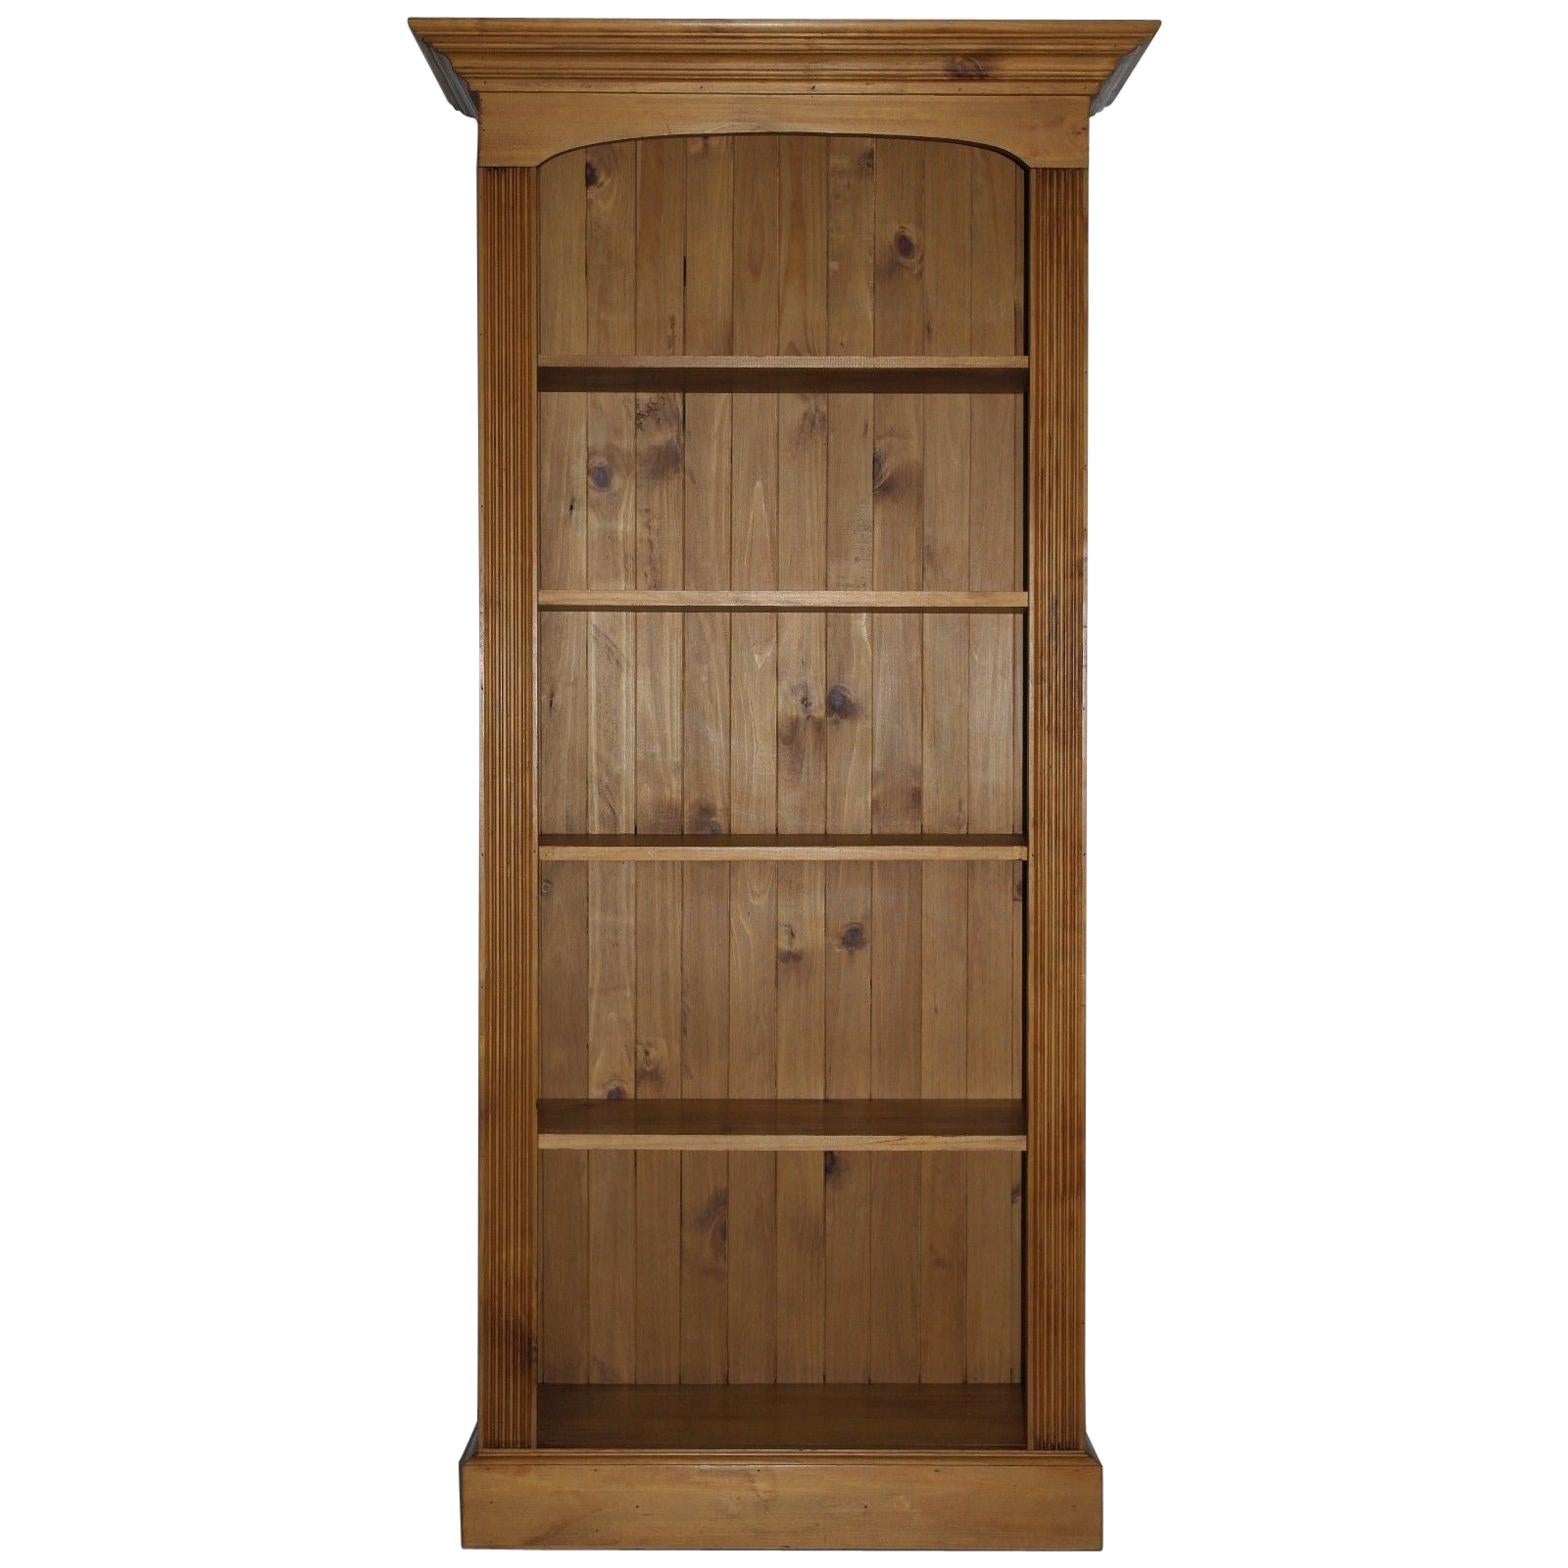 Large Solid Pine Farmhouse Country Bookcase Lovely Natural Wood Finish and Feel